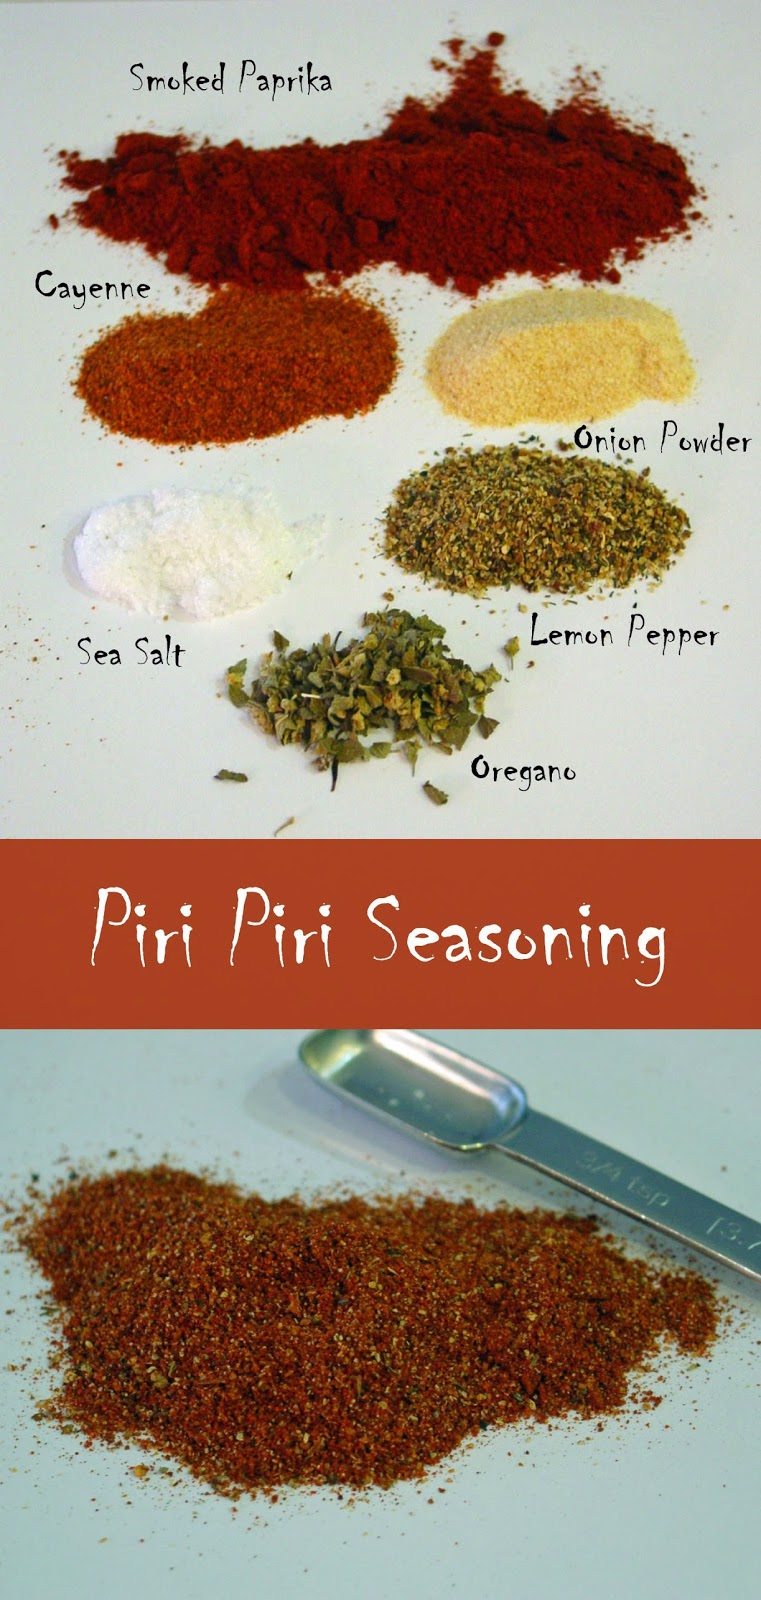 Easy Homemade Poultry Seasoning Recipe - Dizzy Busy and Hungry!